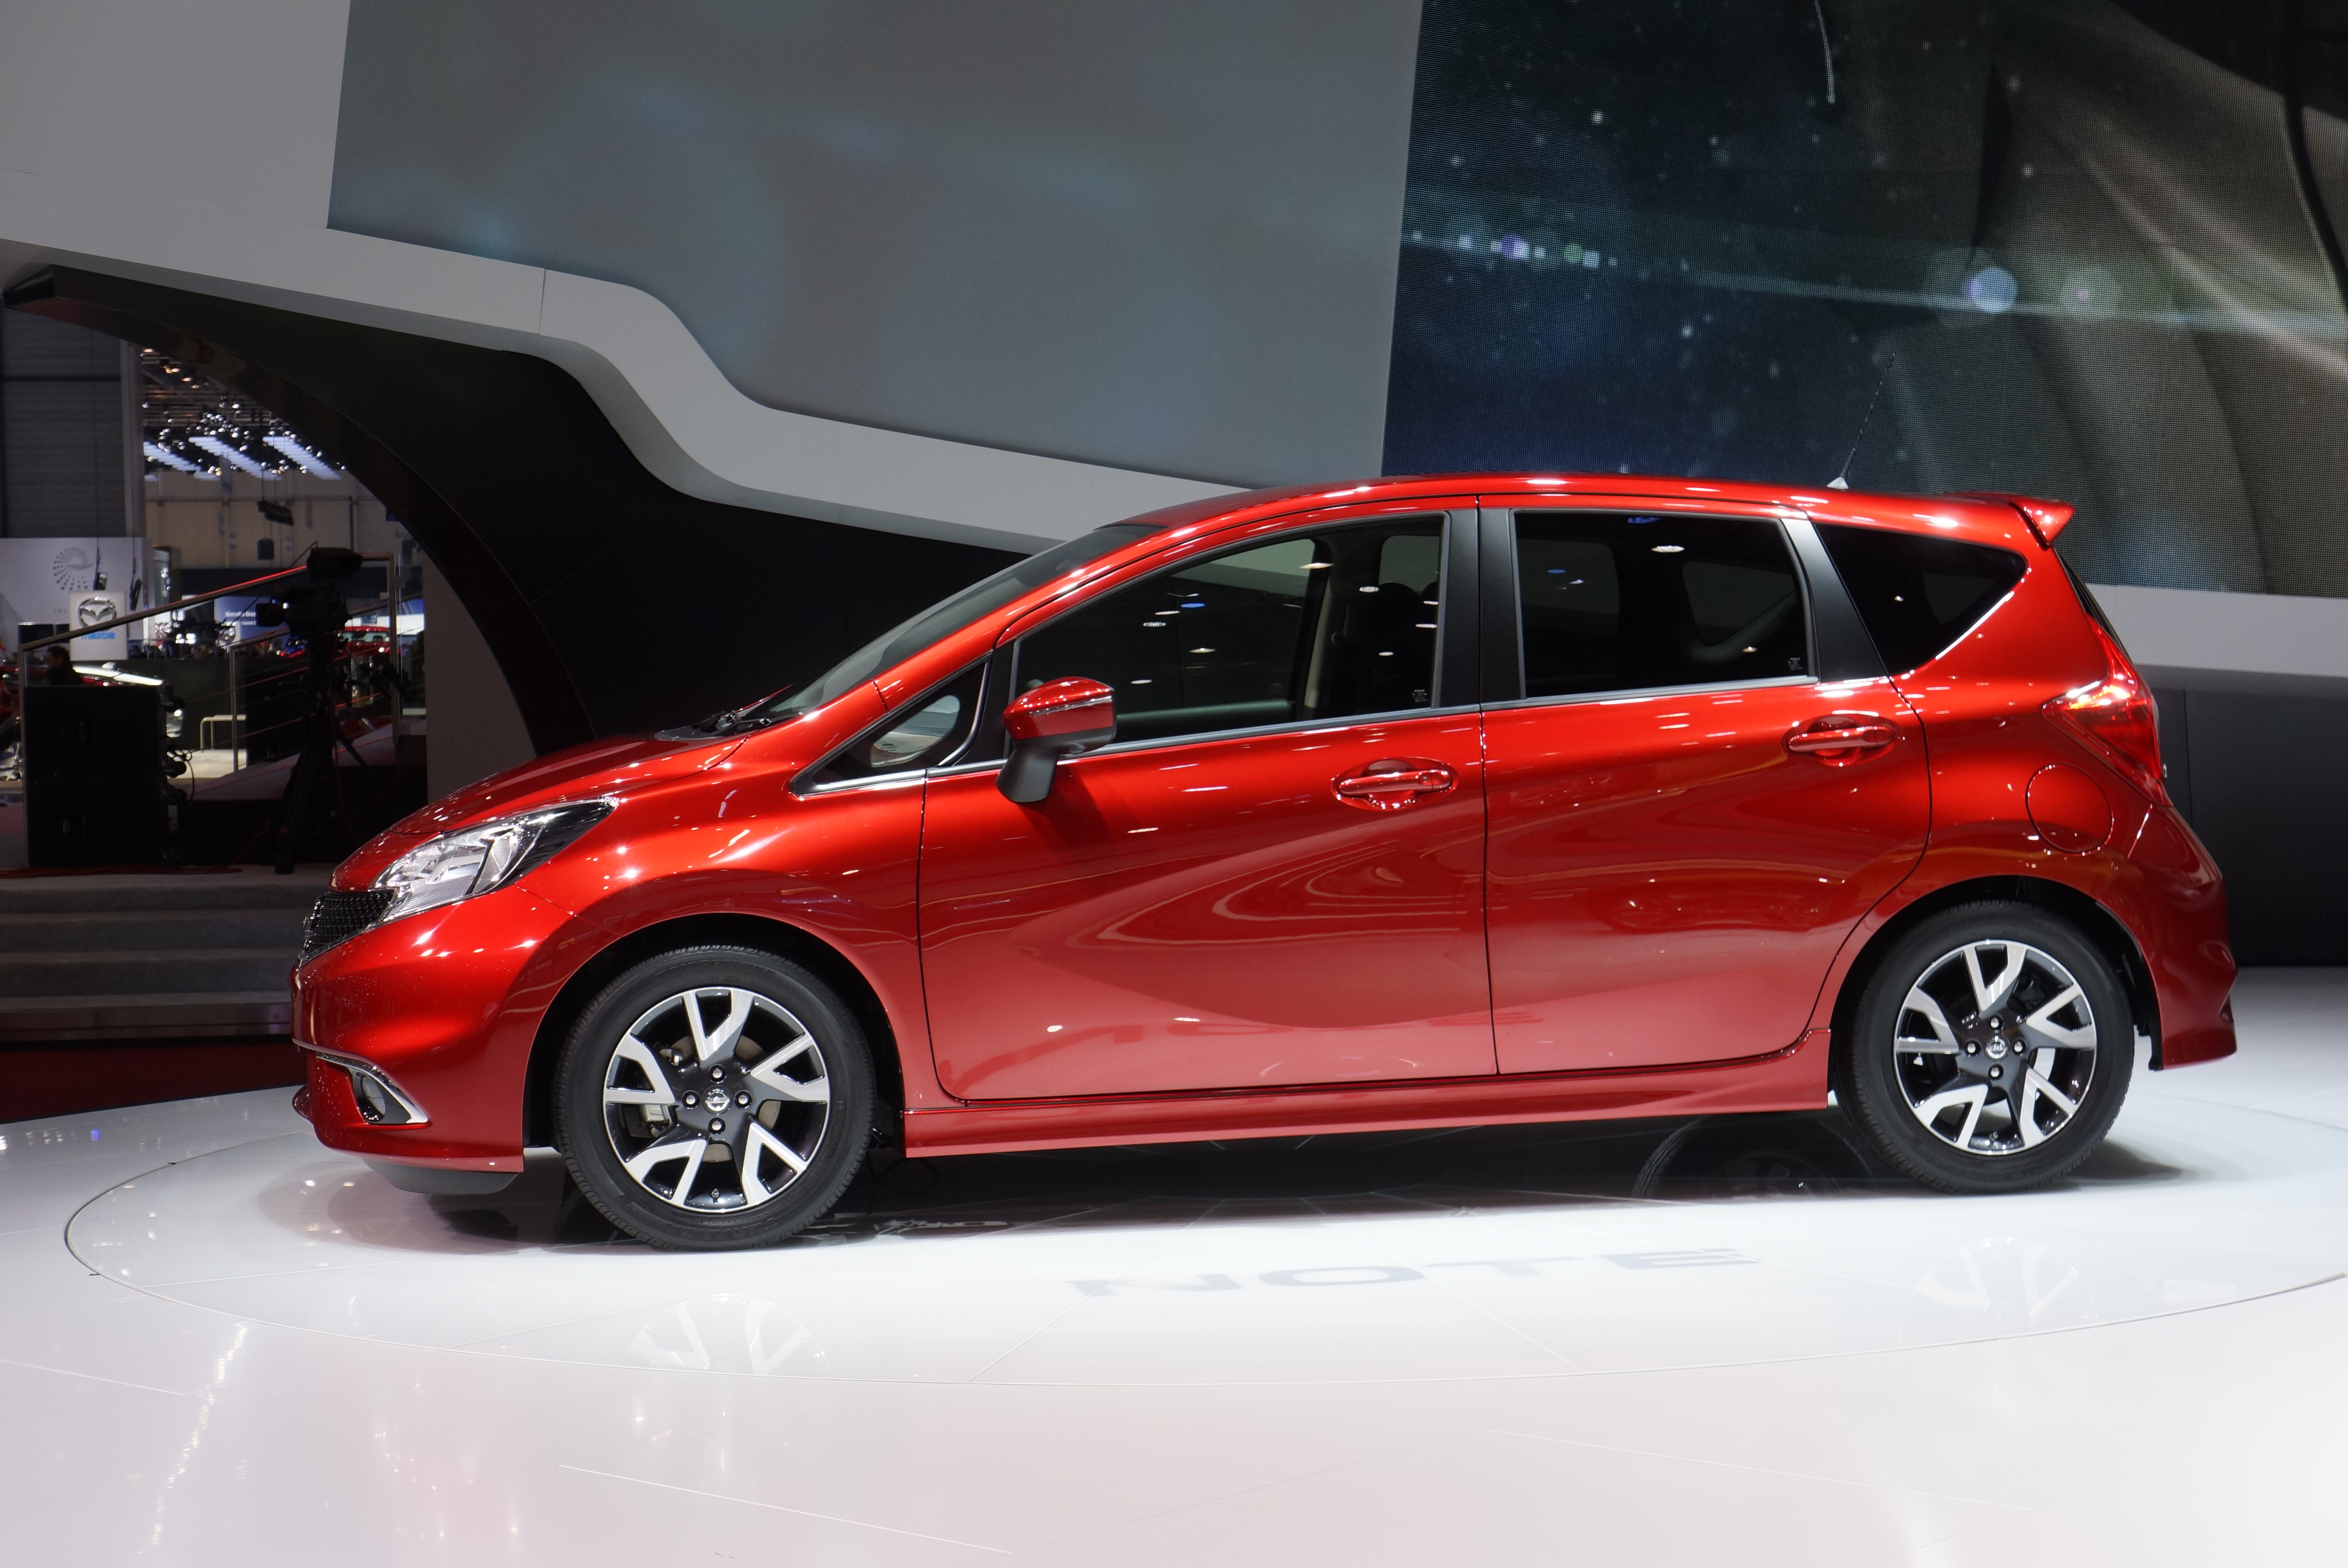 Nissan note 2016. Nissan Note 2013. Ниссан ноут 2013. Ниссан ноут новый.